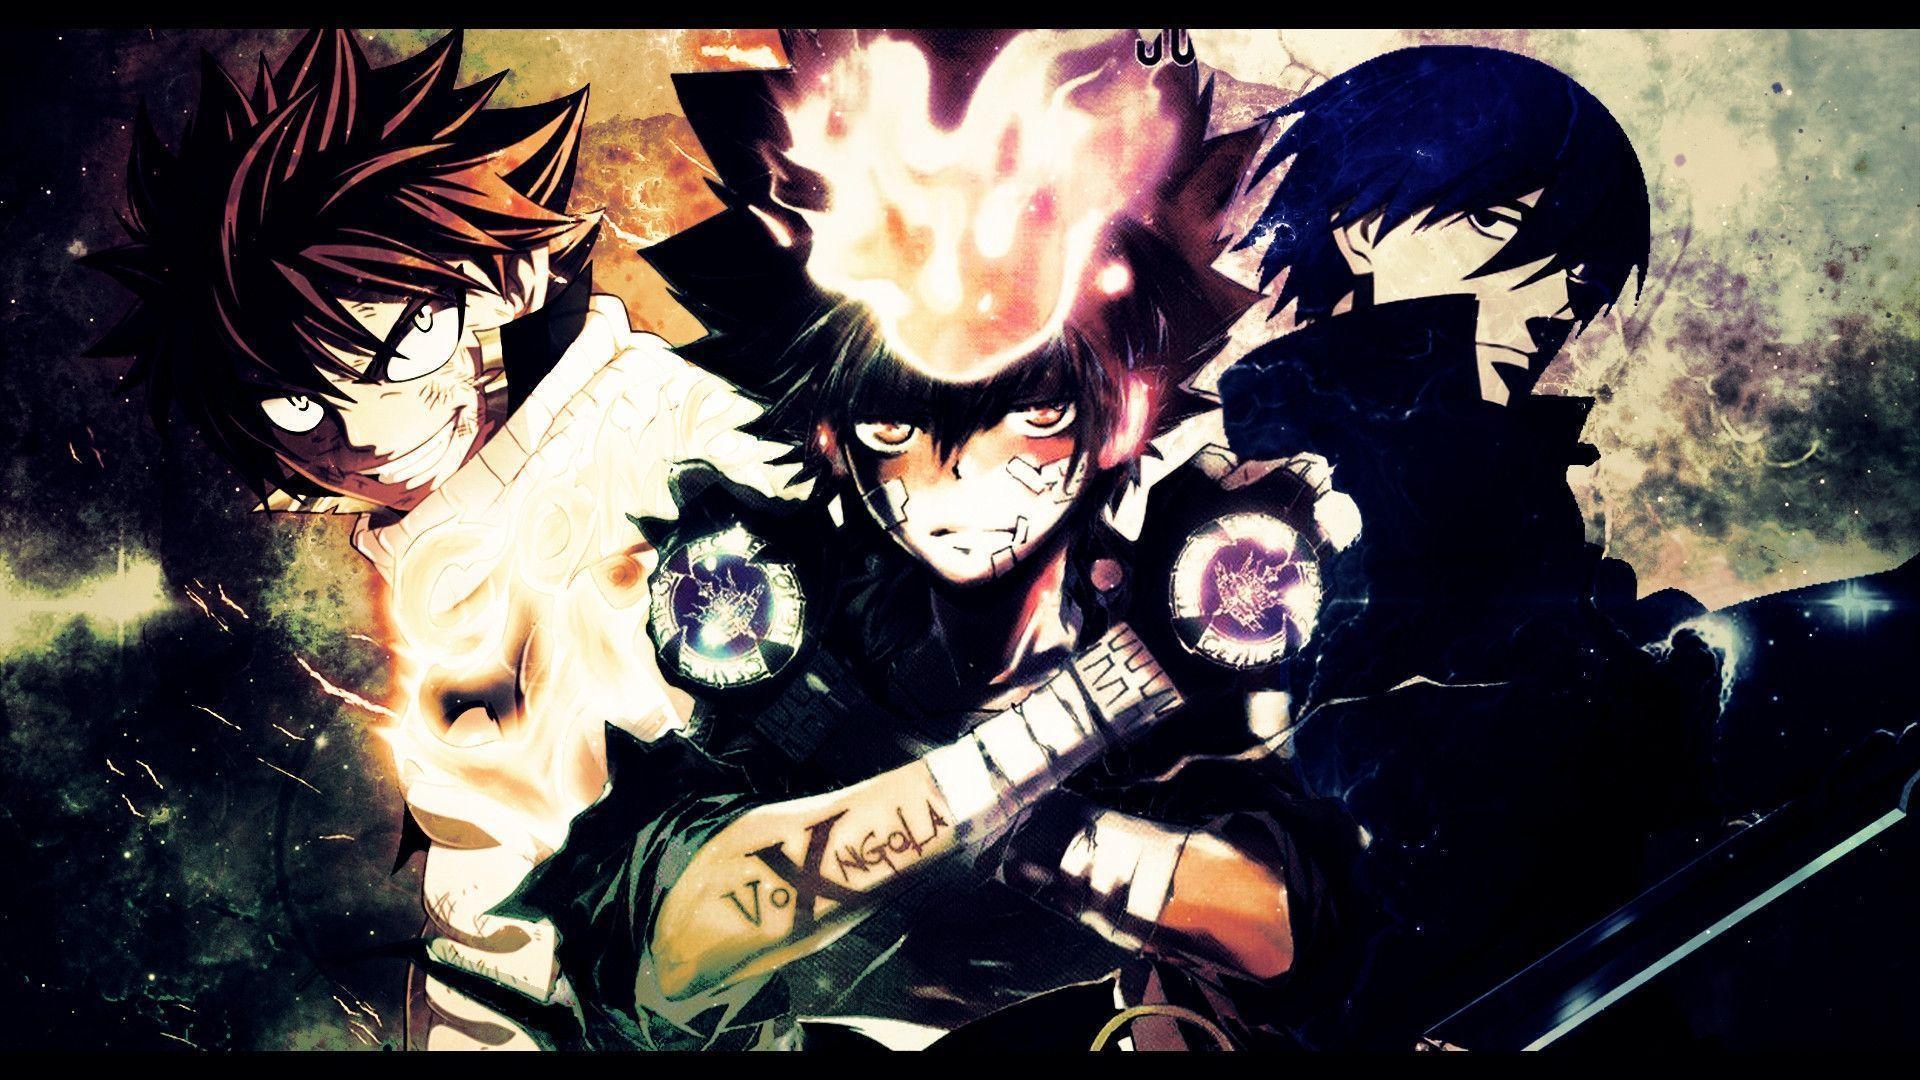 1920 x 1080 · jpeg - Awesome Anime Wallpapers - Wallpaper Cave